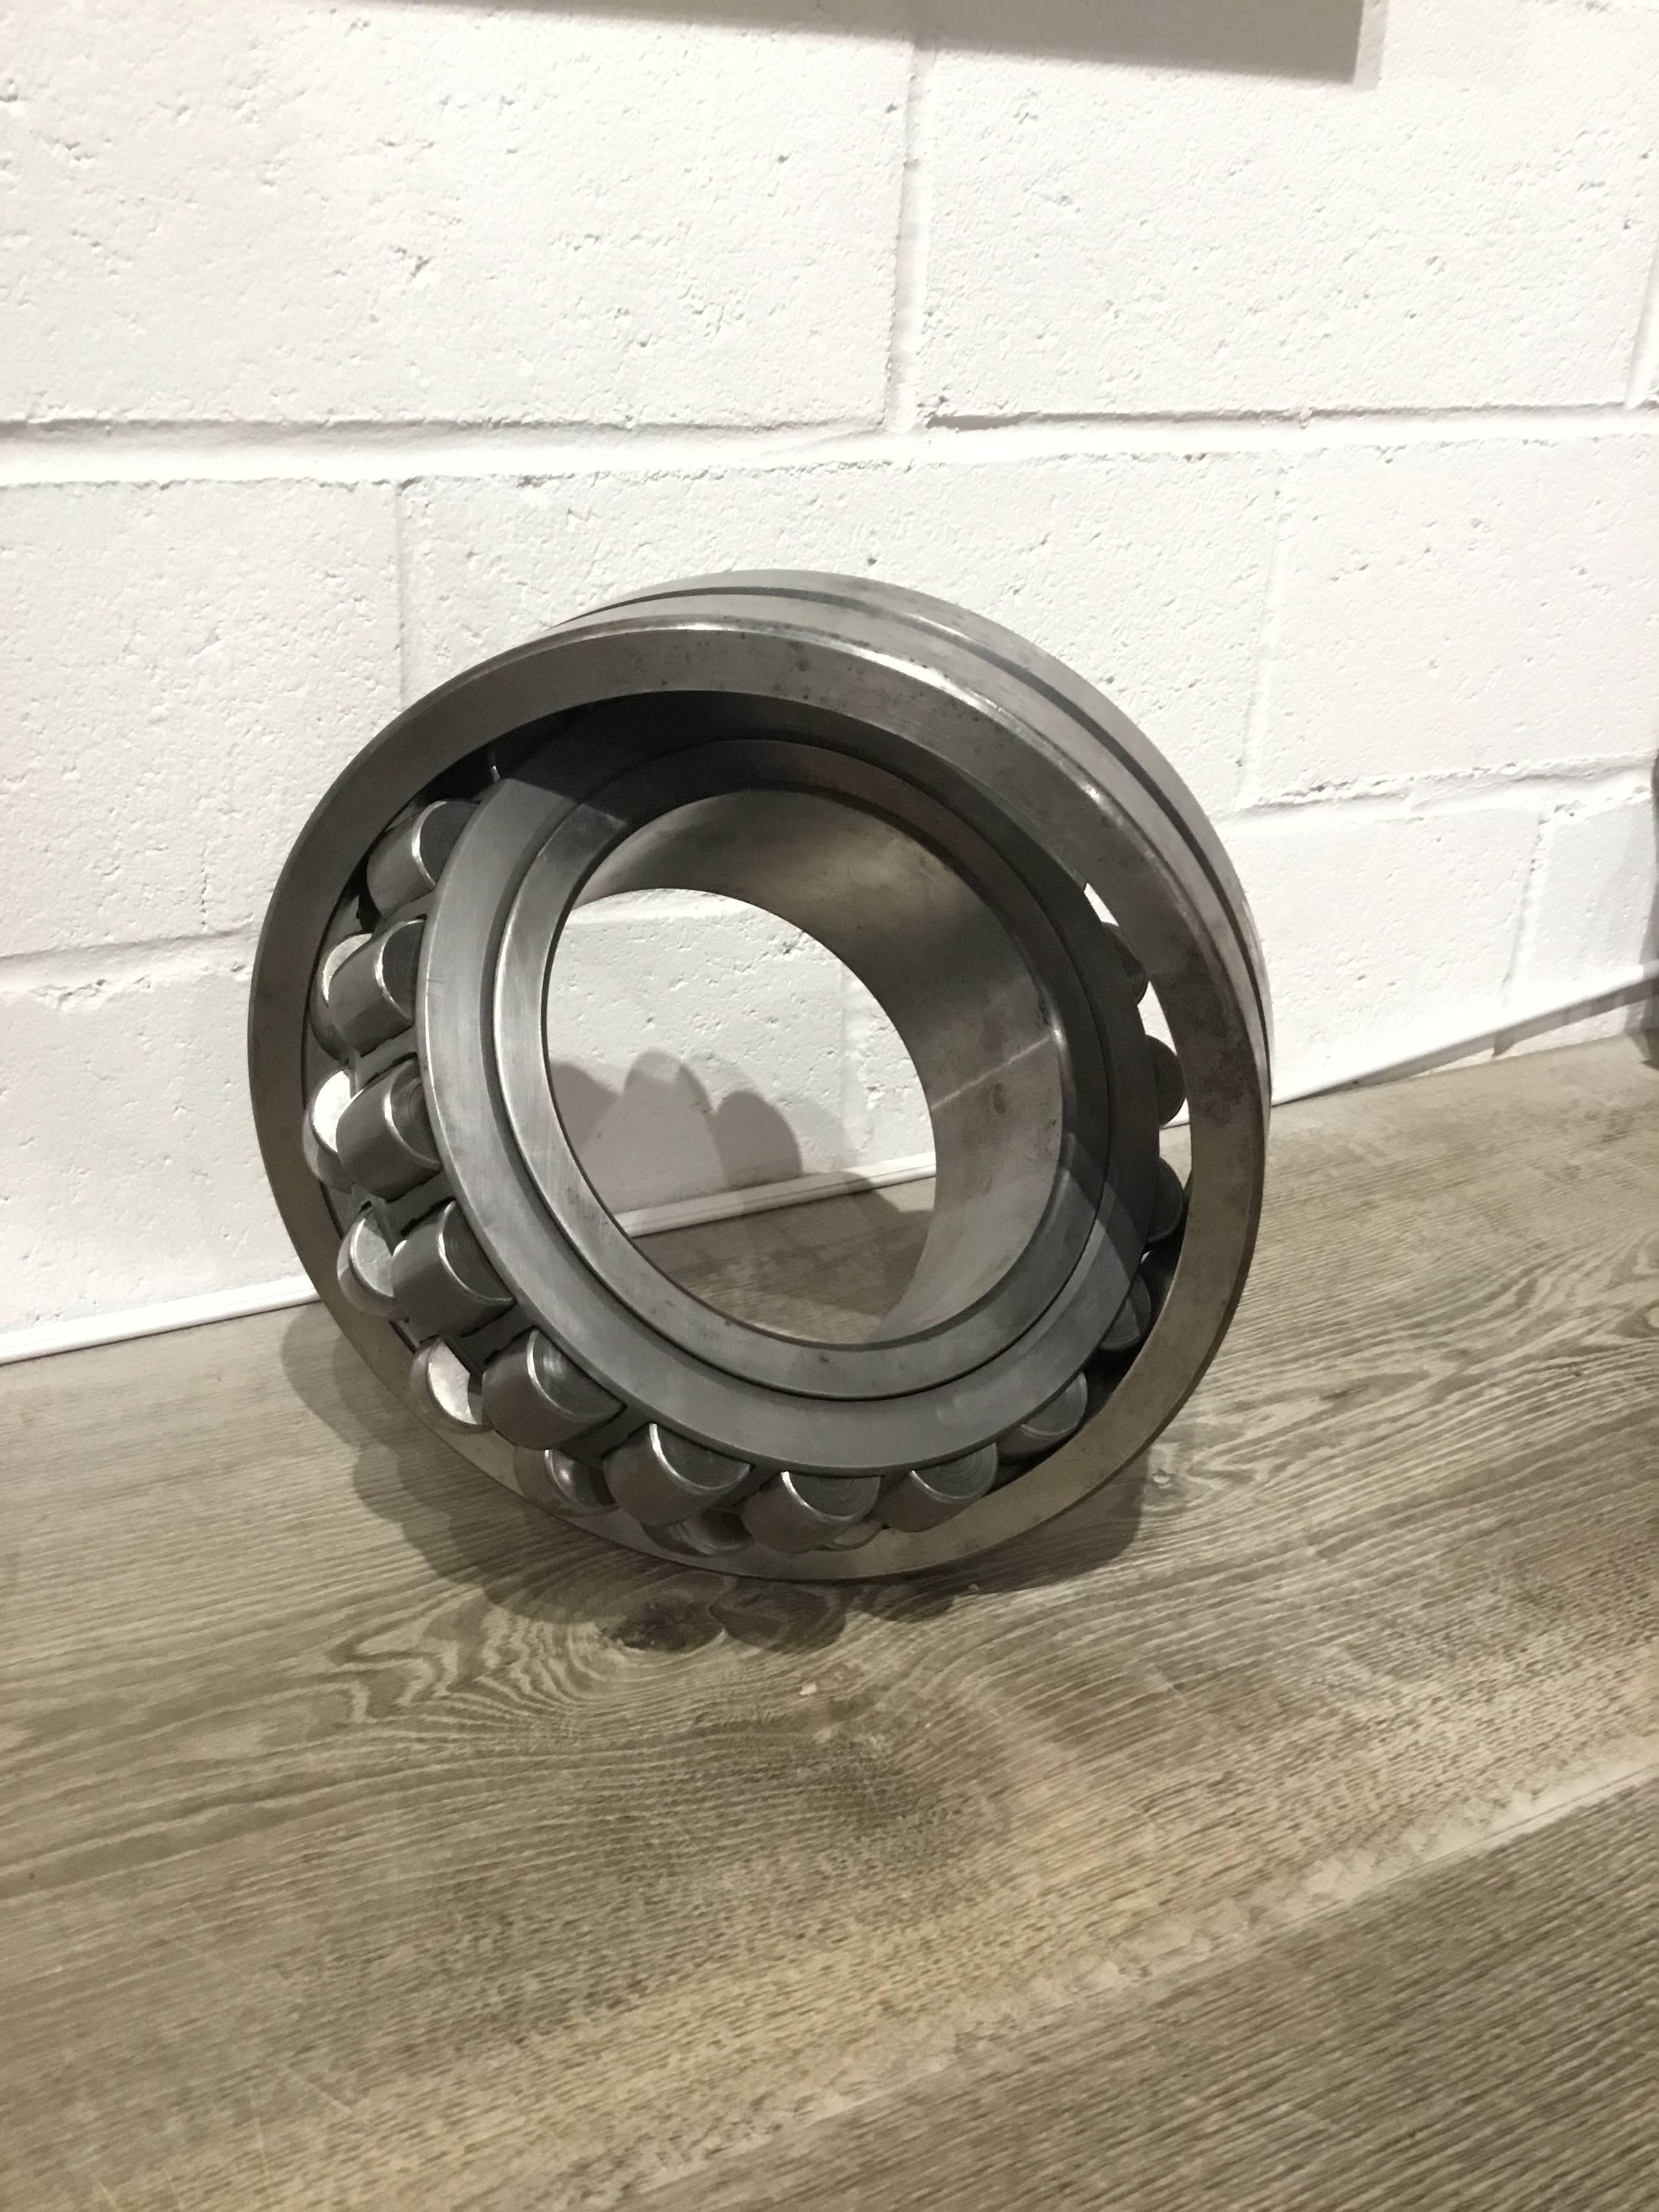 A vintage ballbearing

Wear consistent with age.

Used items may have wear and/or flaws which the pictures cannot depict. All vintage item sales are final and non-returnable. All collectibles and antique furniture are sold AS IS.